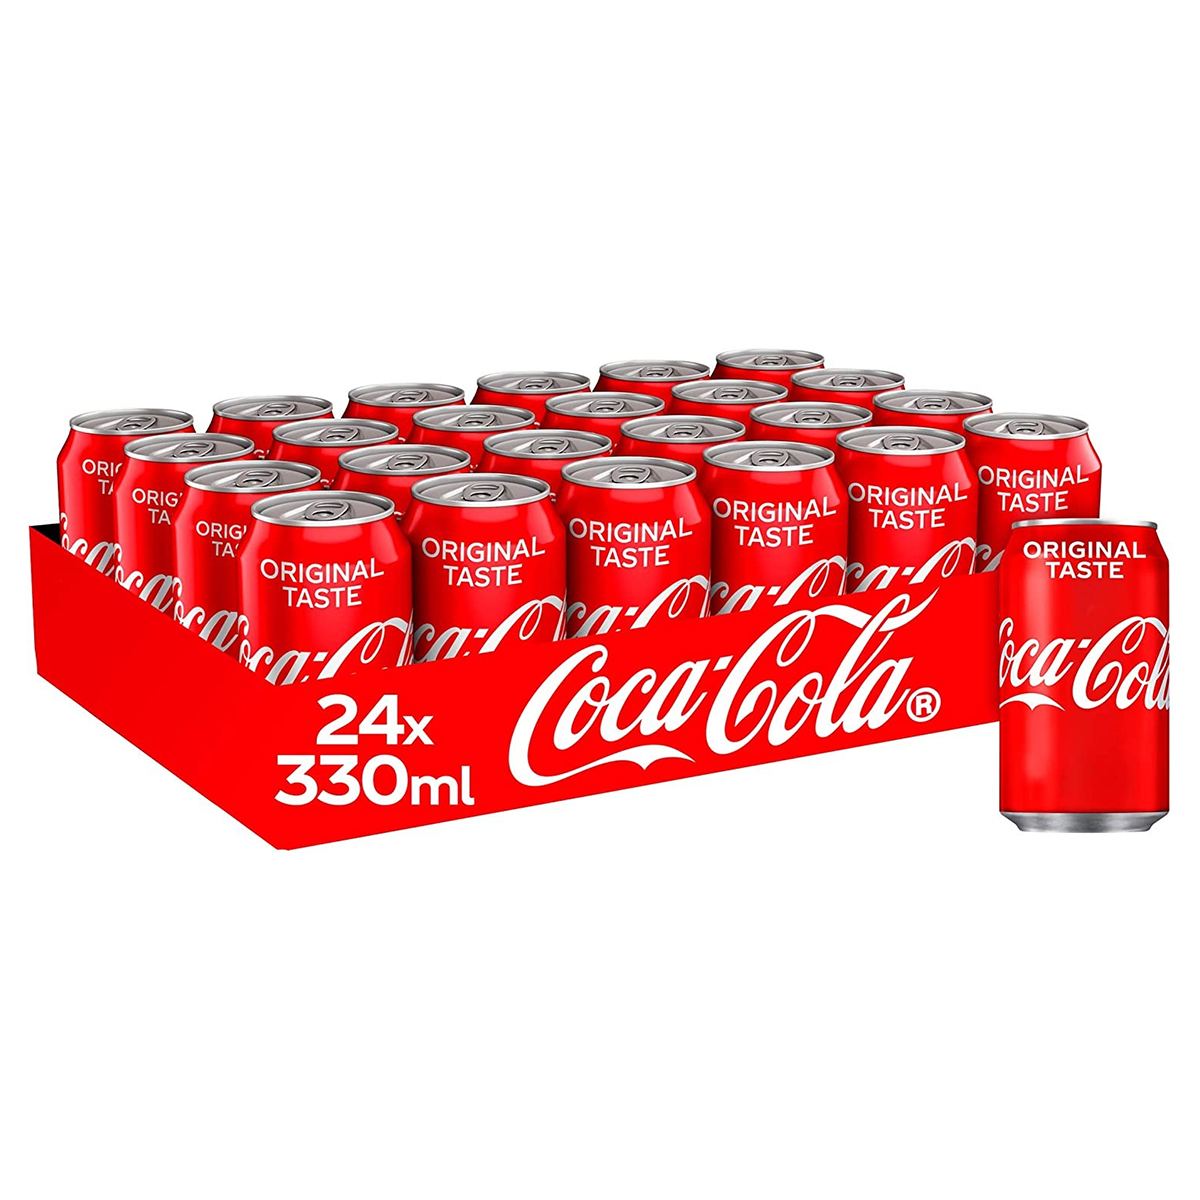 Coca-Cola Original Taste Cans 24x330ml (Collection-Only)